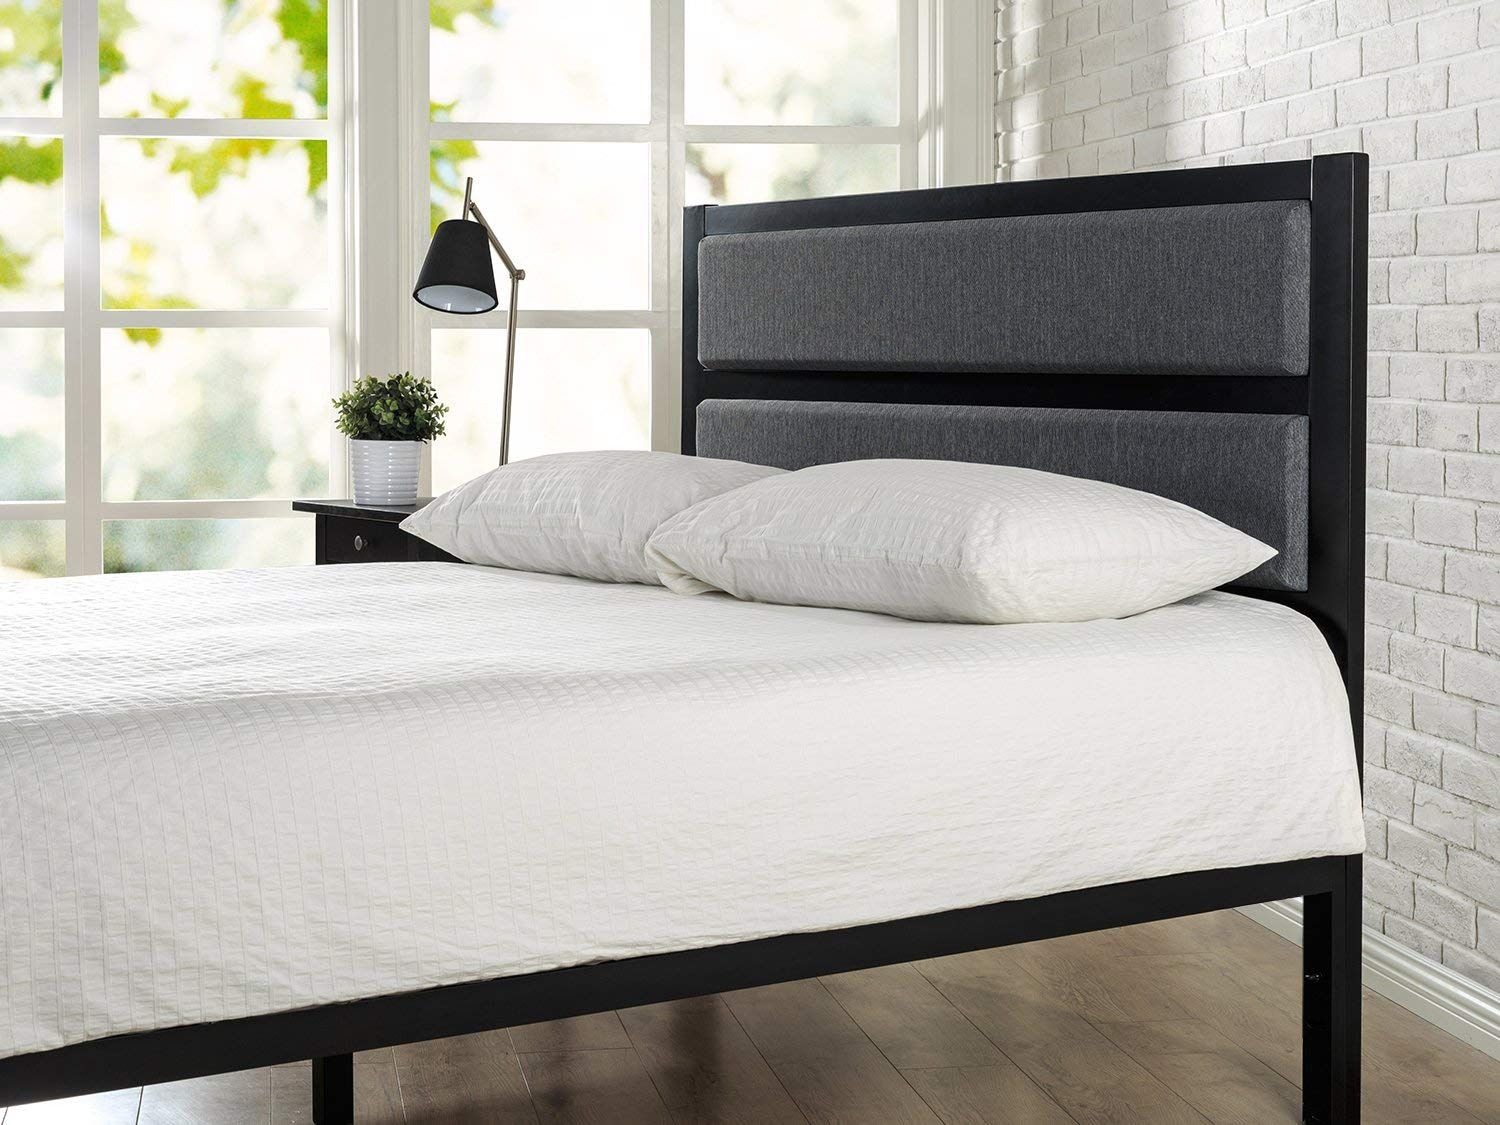 12 Best Headboards 2019 The Strategist, How To Attach Upholstered Headboard Metal Frame